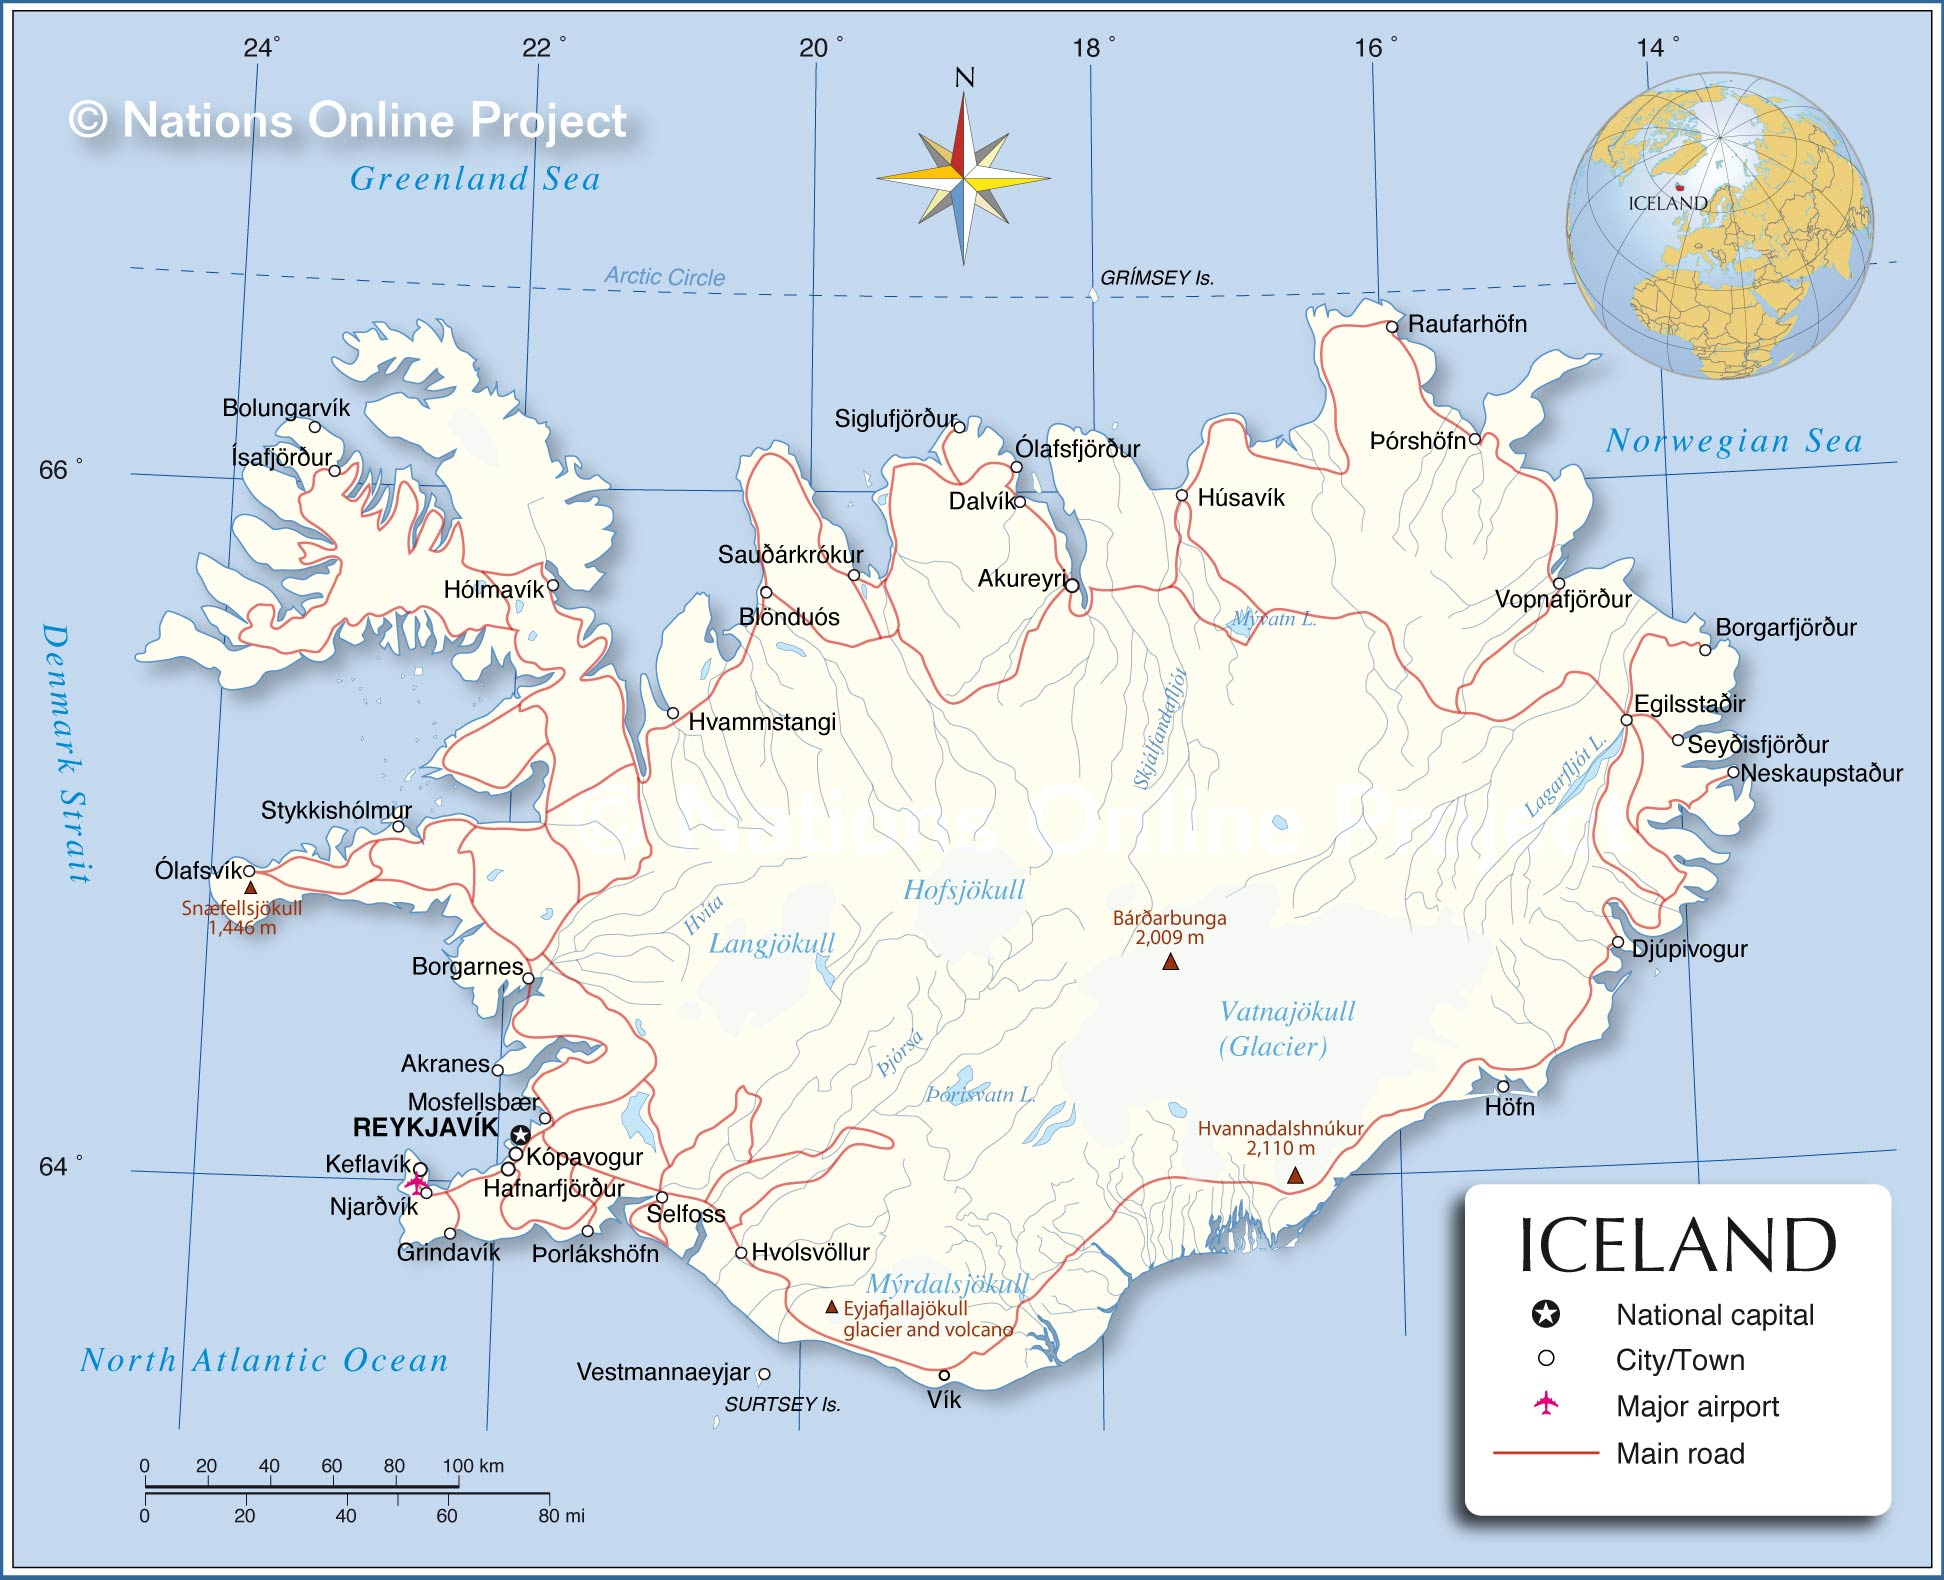 faq-s-about-iceland-hello965